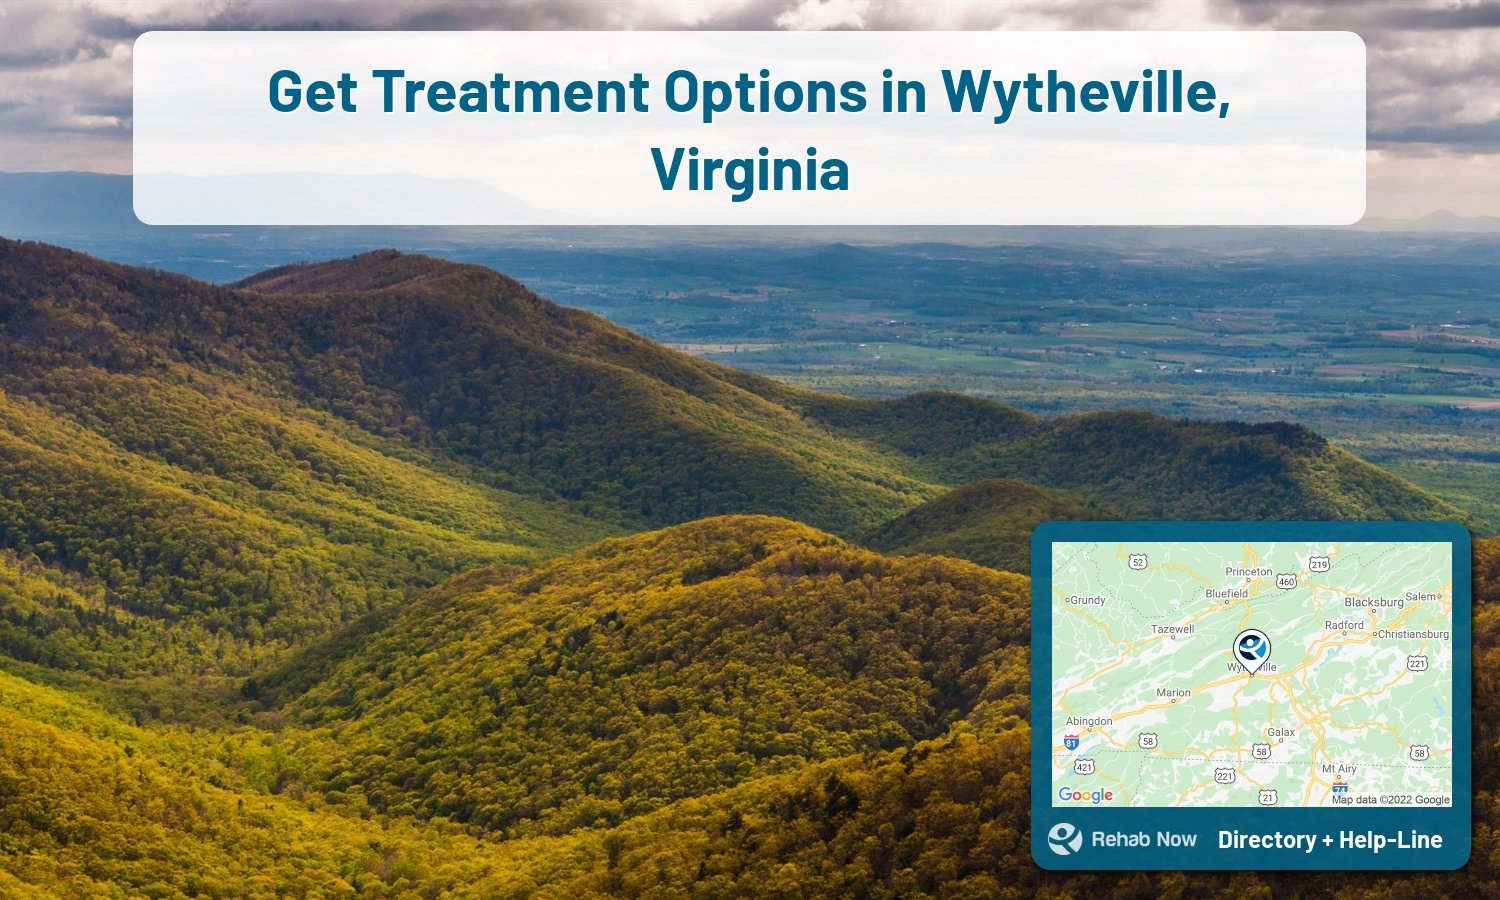 Drug rehab and alcohol treatment services nearby Wytheville, VA. Need help choosing a treatment program? Call our free hotline!